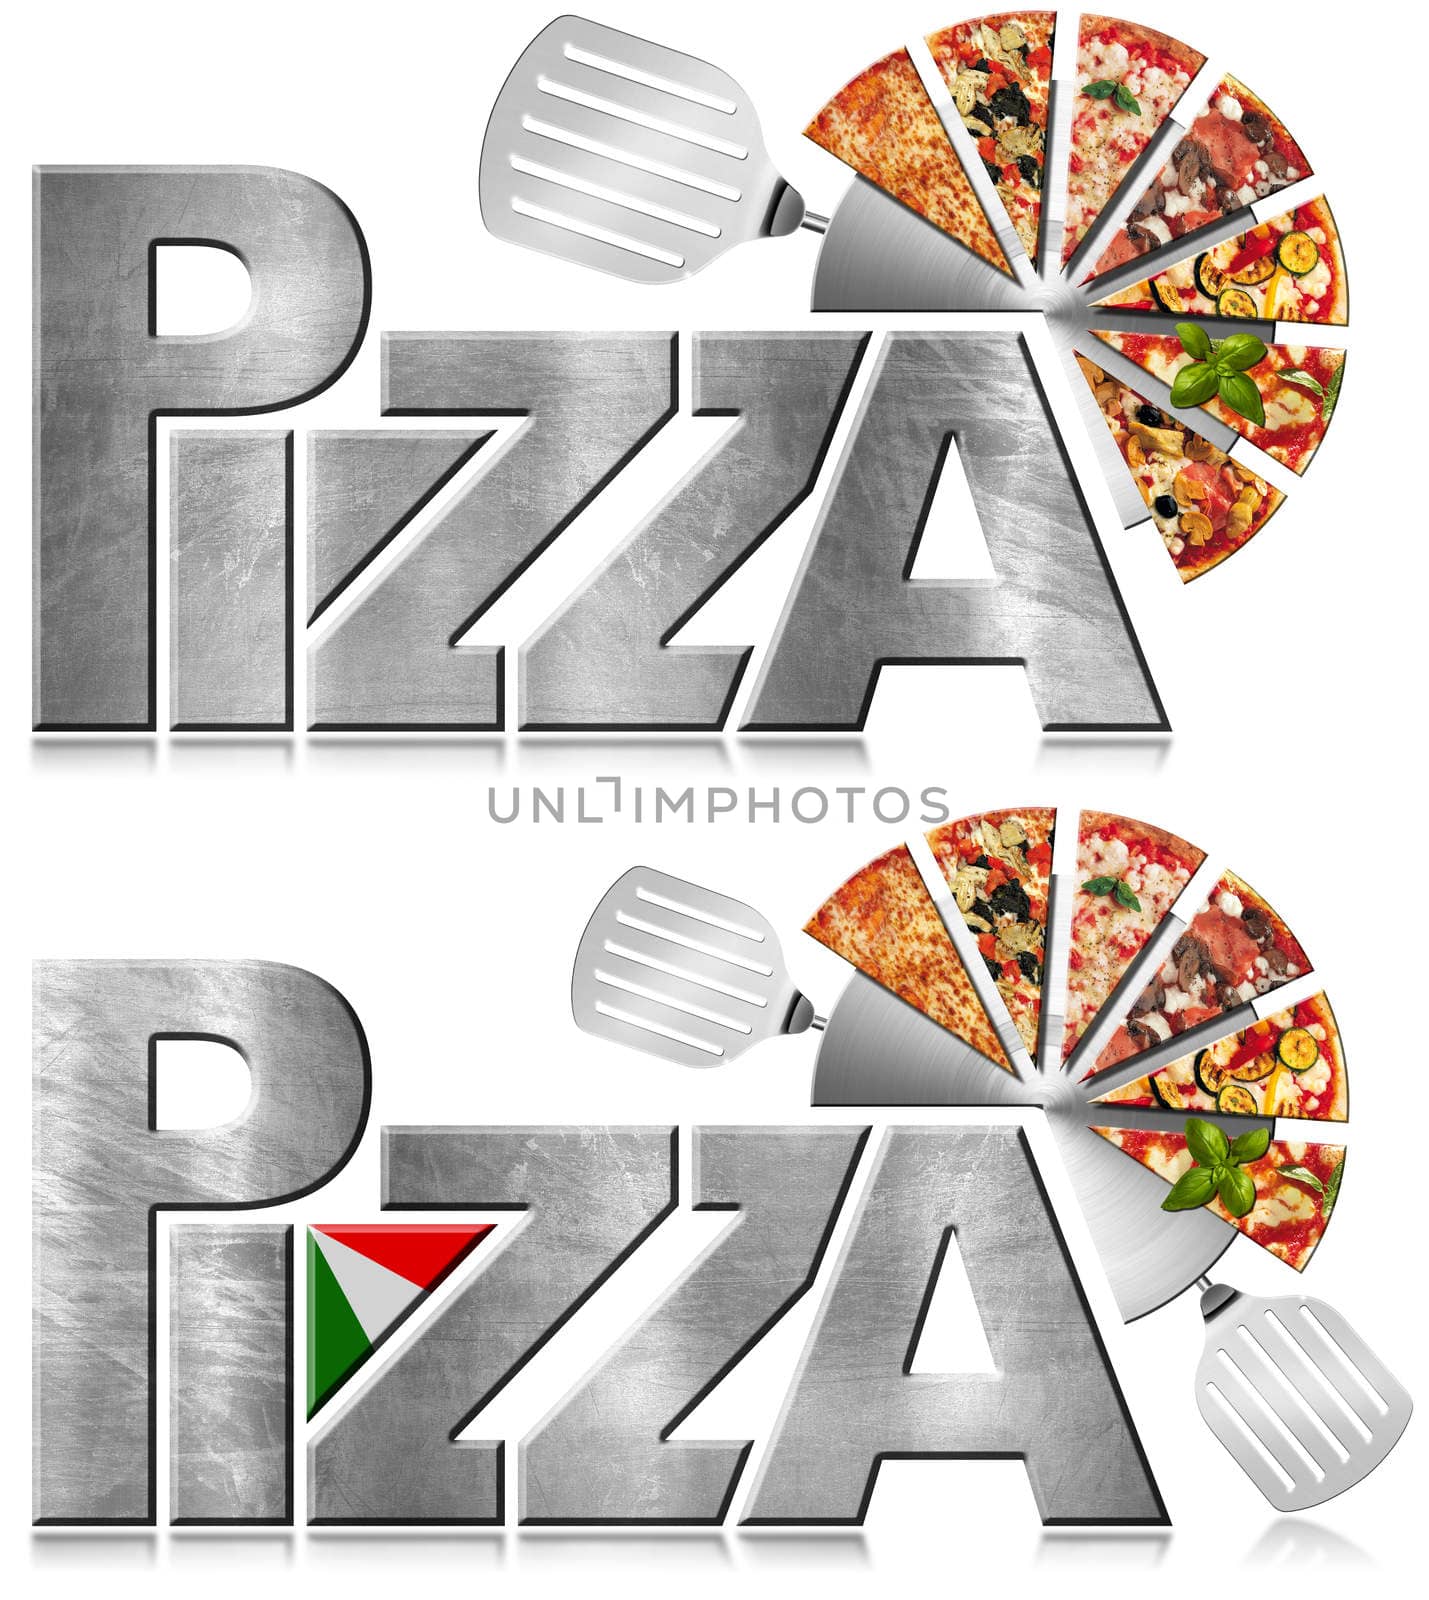 Two metallic icons or symbols with text Pizza, stainless steel pizza cutter, spatulas and slices of pizza. Isolated on a white background